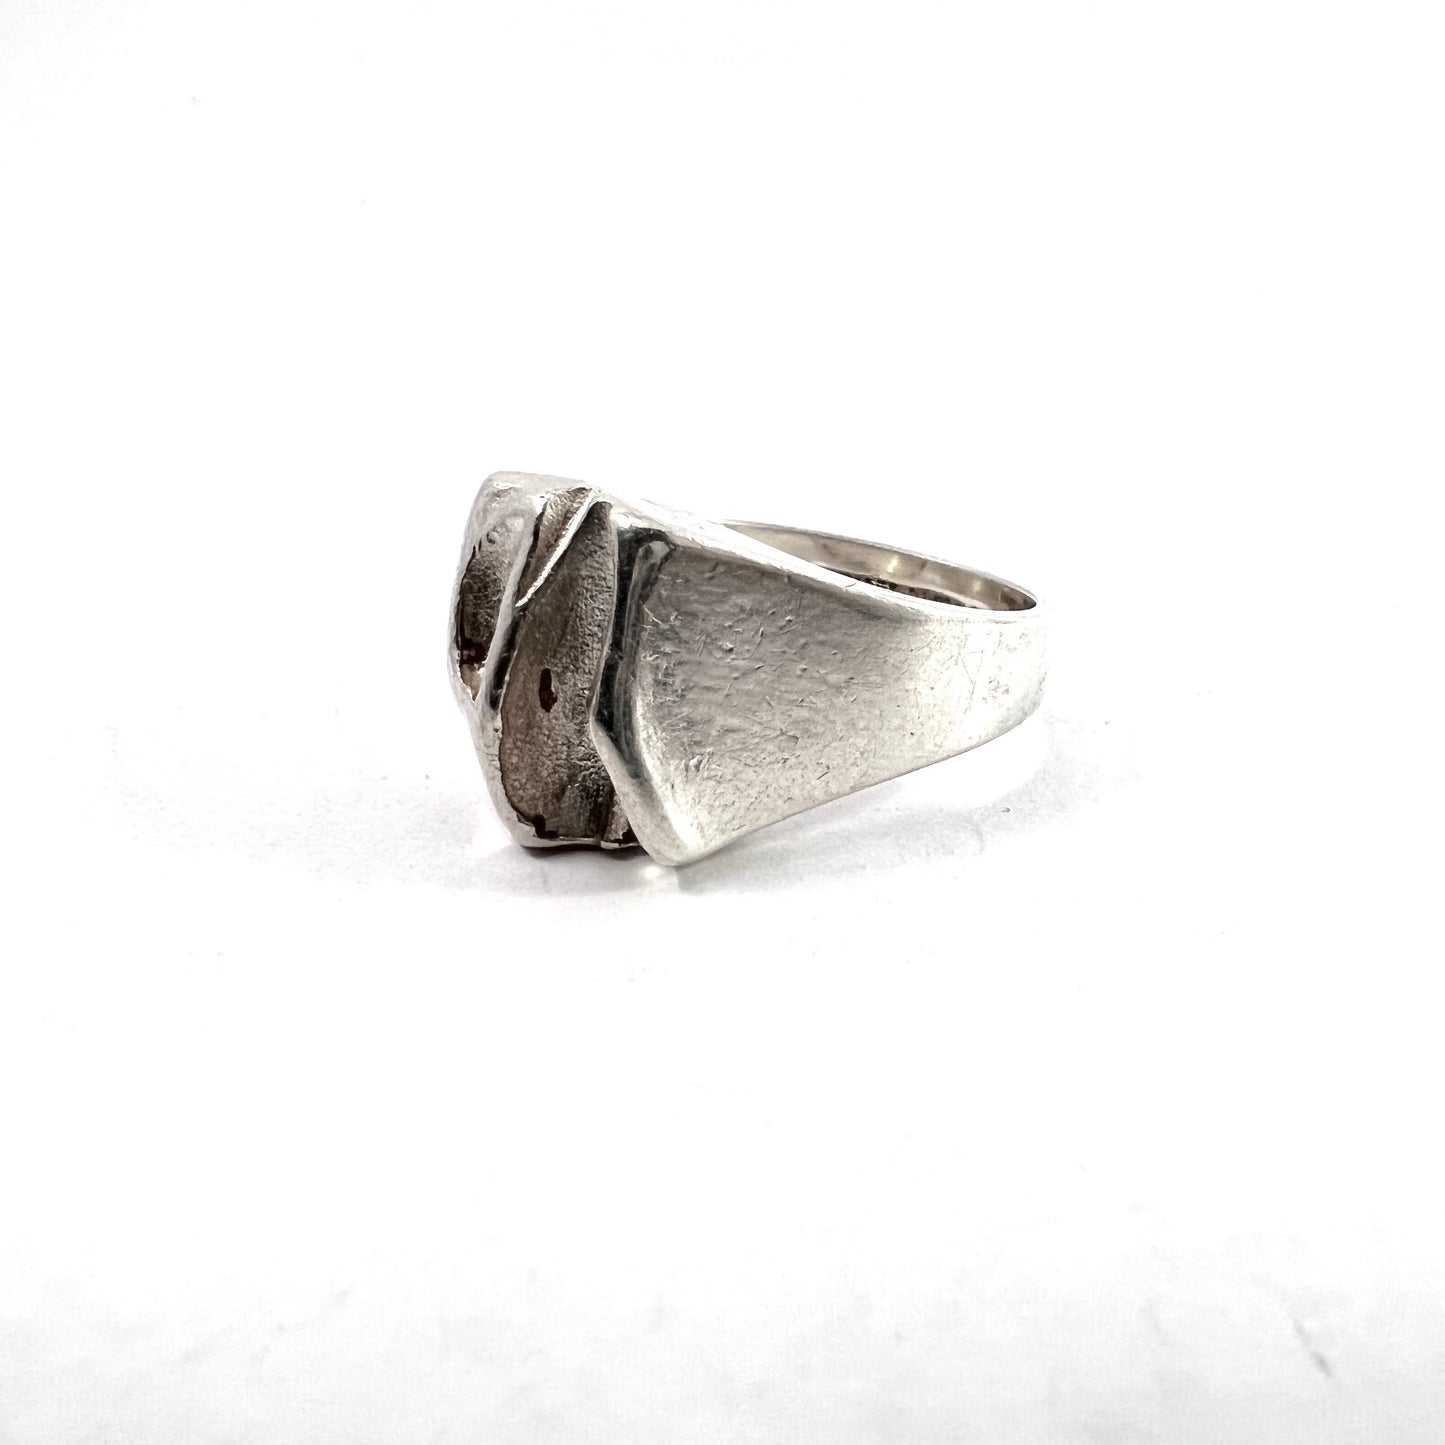 Bjorn Weckstrom for Lapponia, Finland 1994. Vintage Sterling Silver Ring.